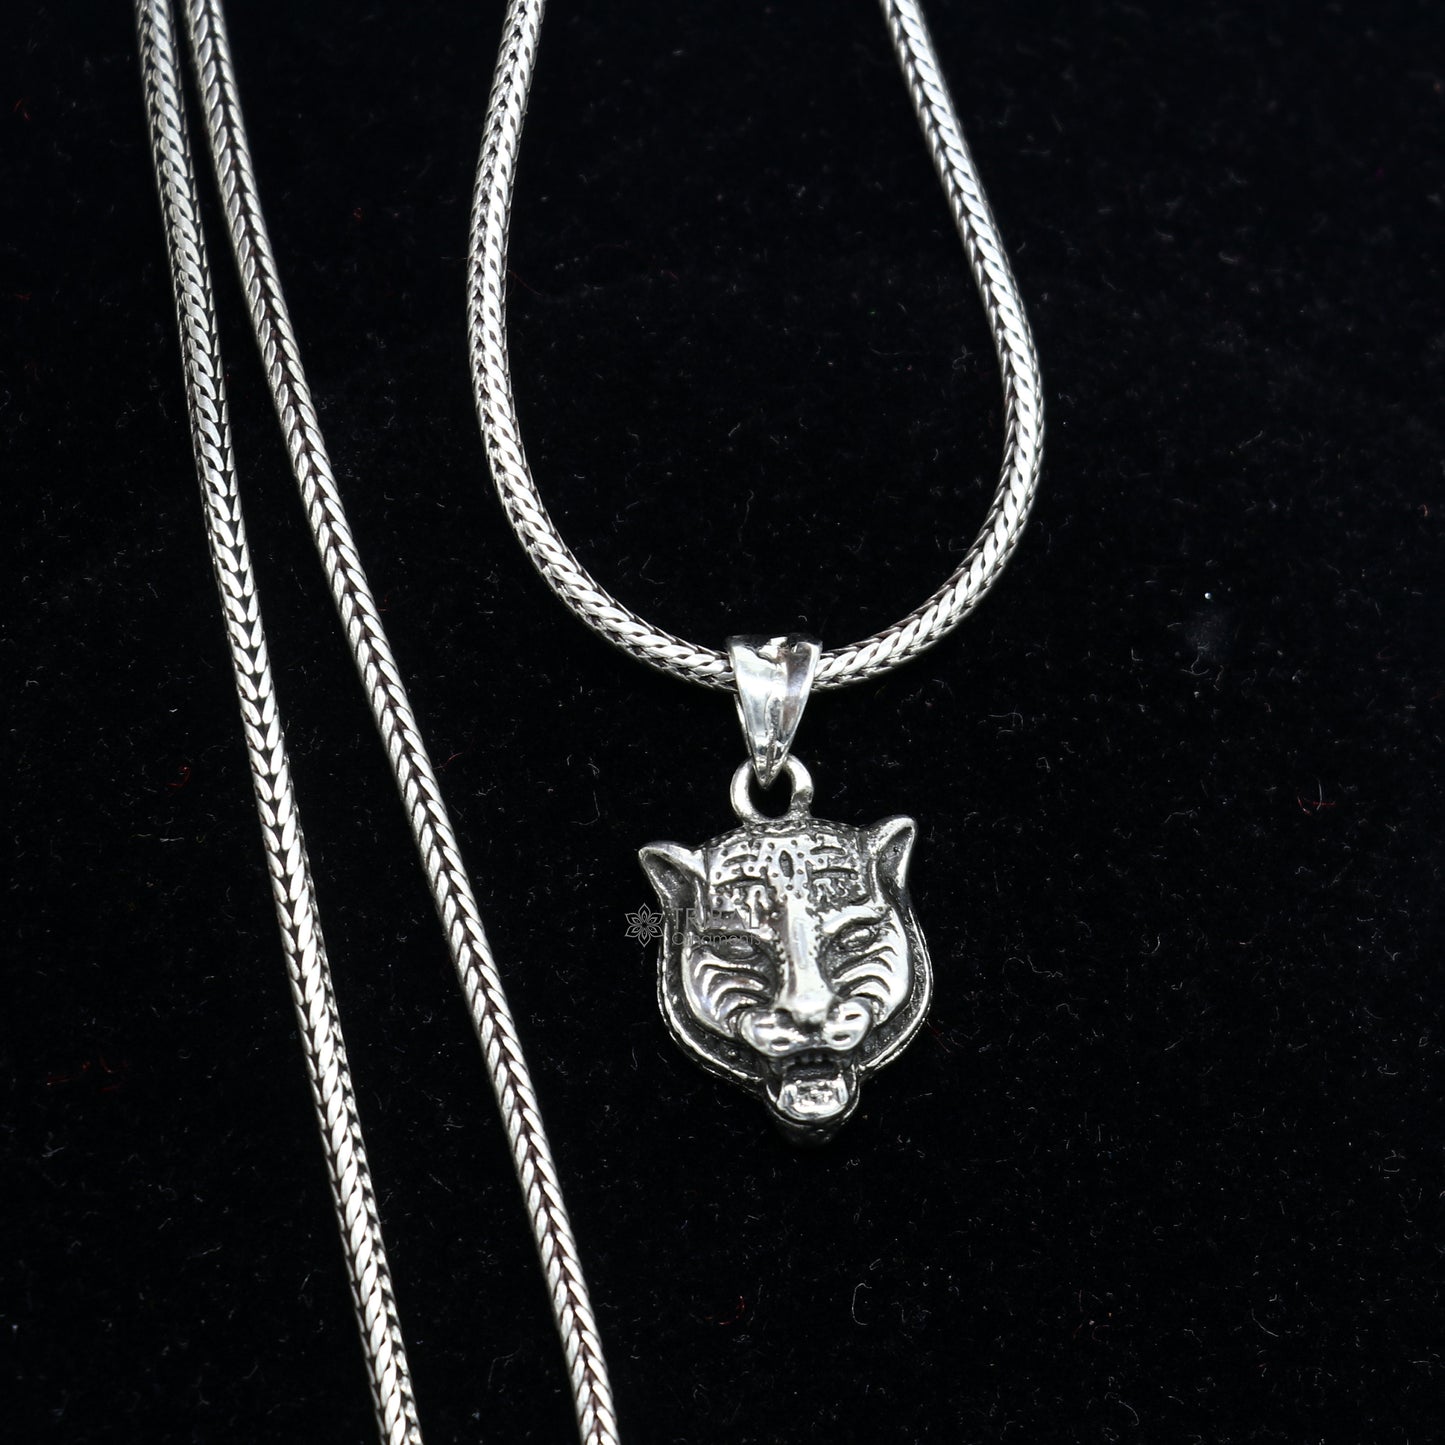 925 sterling silver unique lion face/head pendant, silver forest king lion pendant necklace, animal jewelry nsp648 - TRIBAL ORNAMENTS